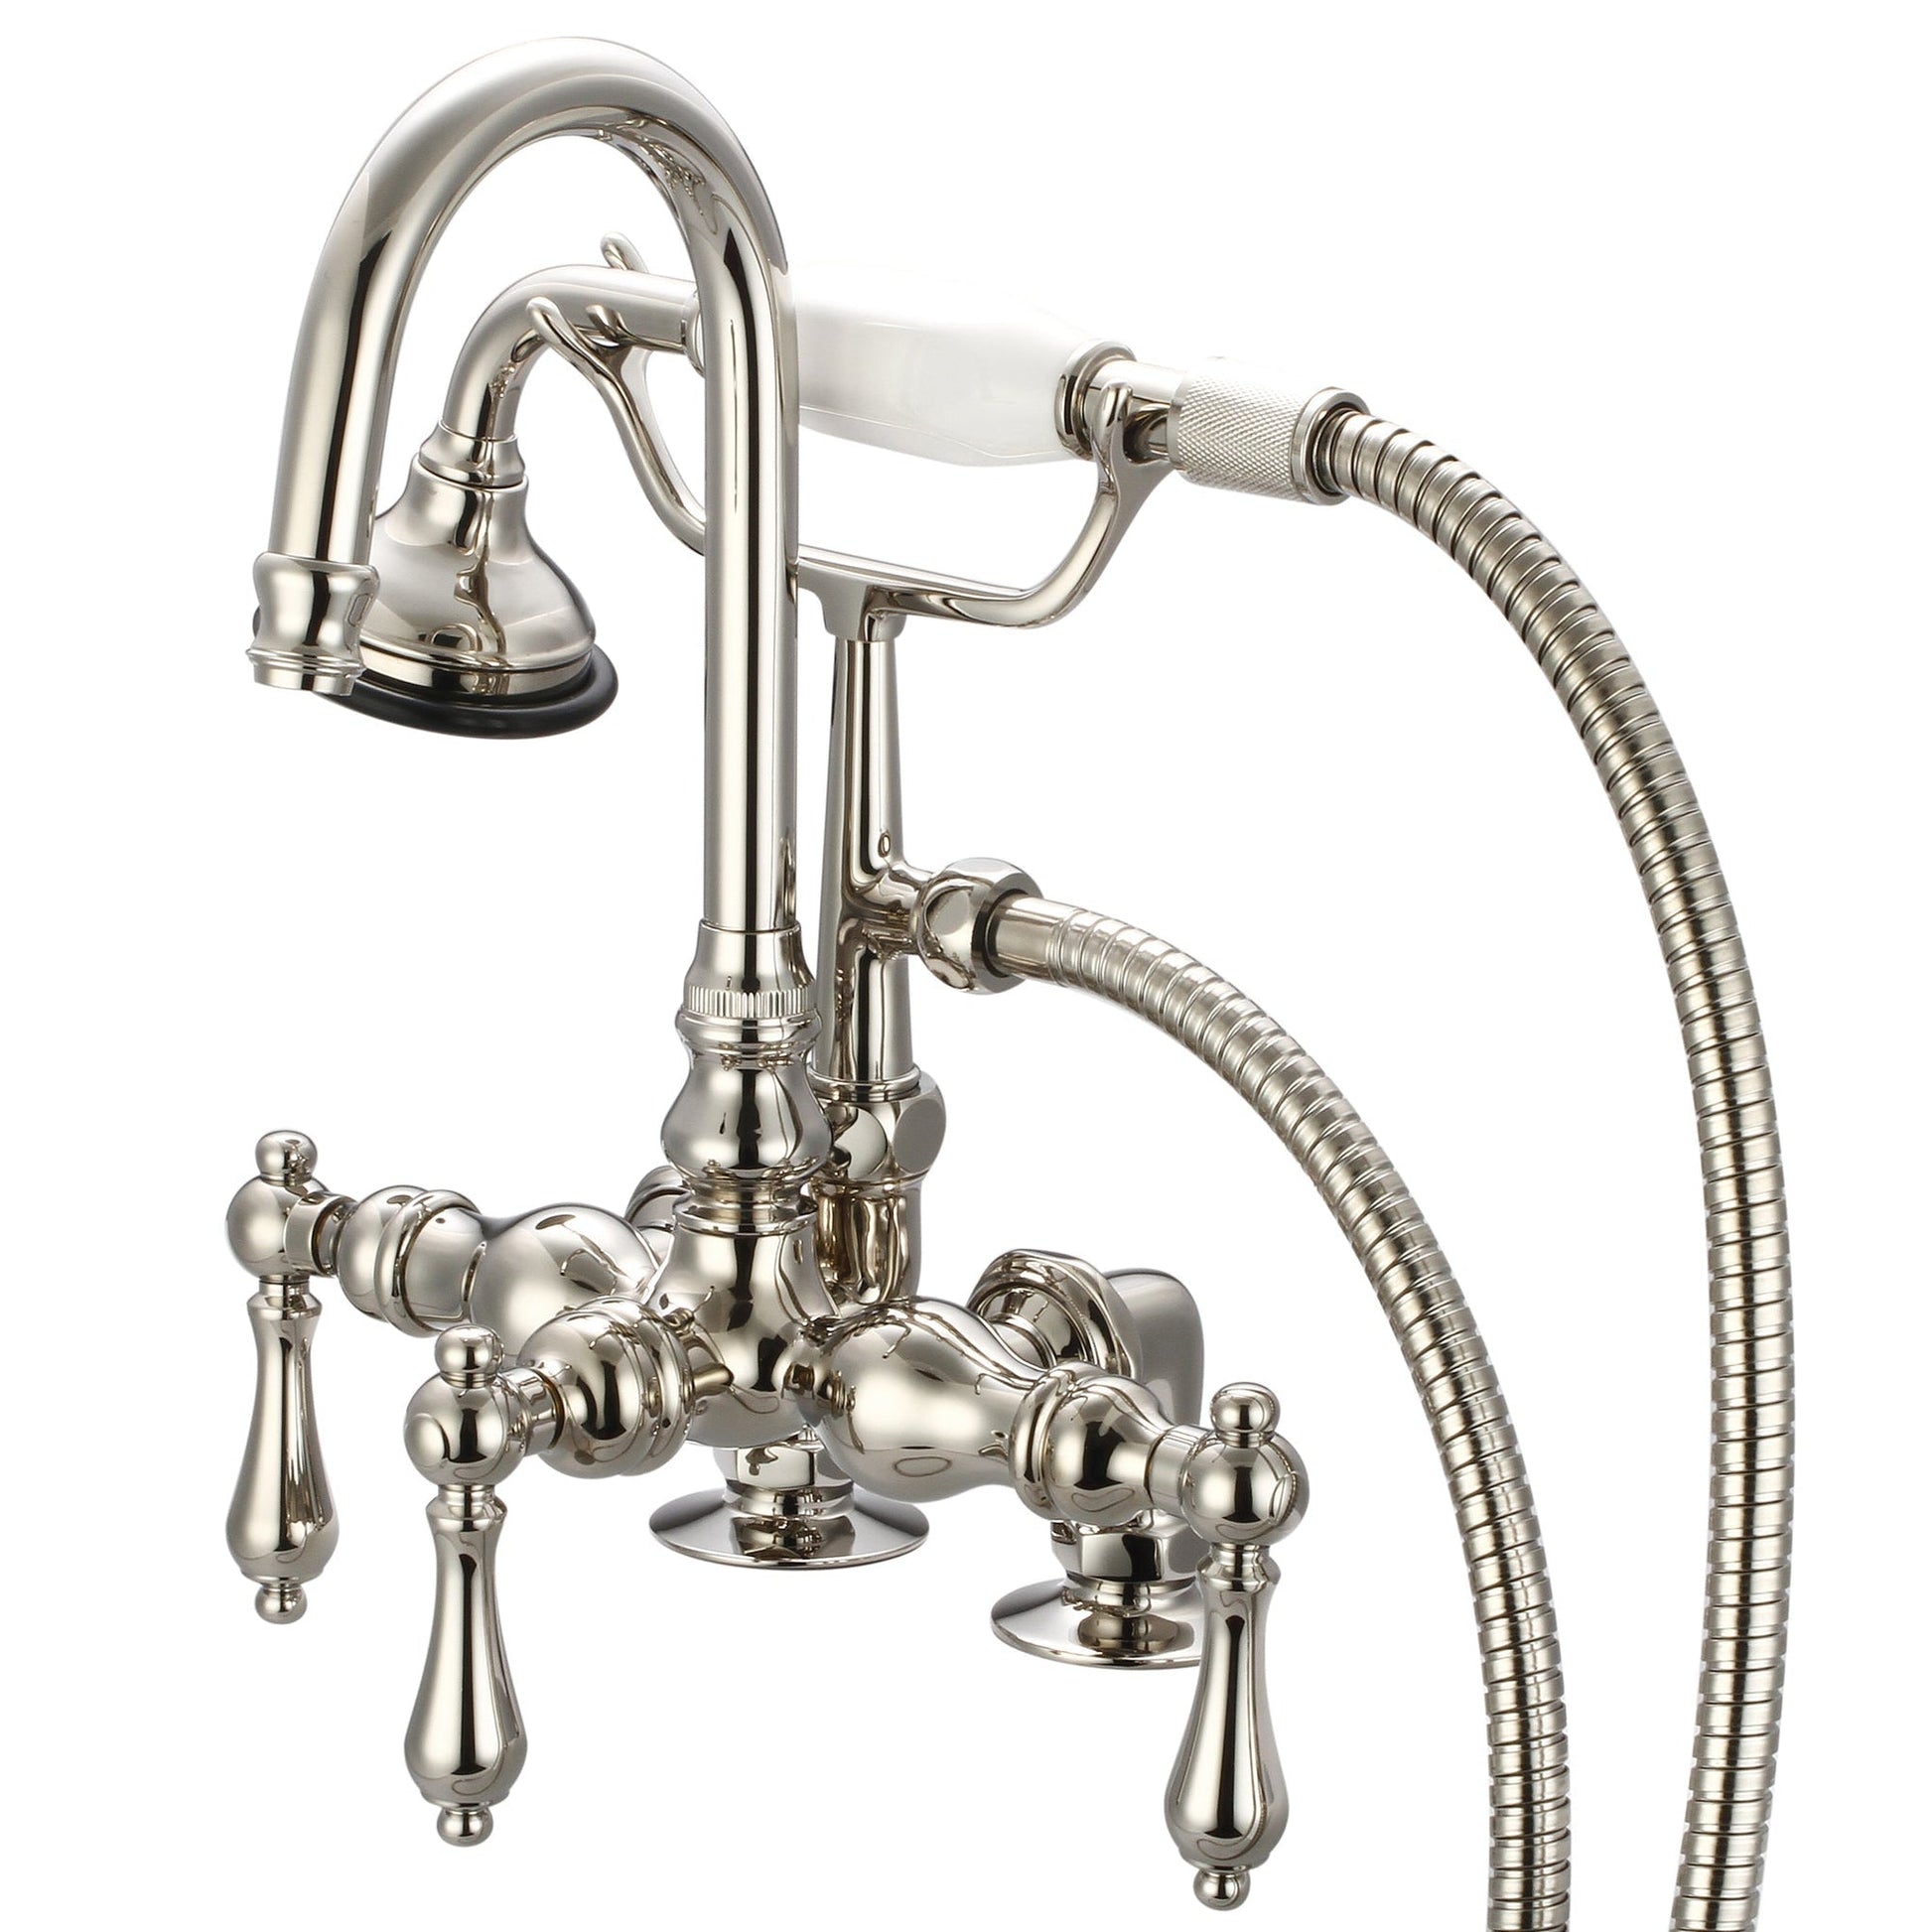 Water Creation Vintage Classic Center Deck Mount Tub F6-0013 9.25" Ivory Solid Brass Faucet With Gooseneck Spout, 2-Inch Risers And Handheld Shower And Metal Lever Handles Without Labels